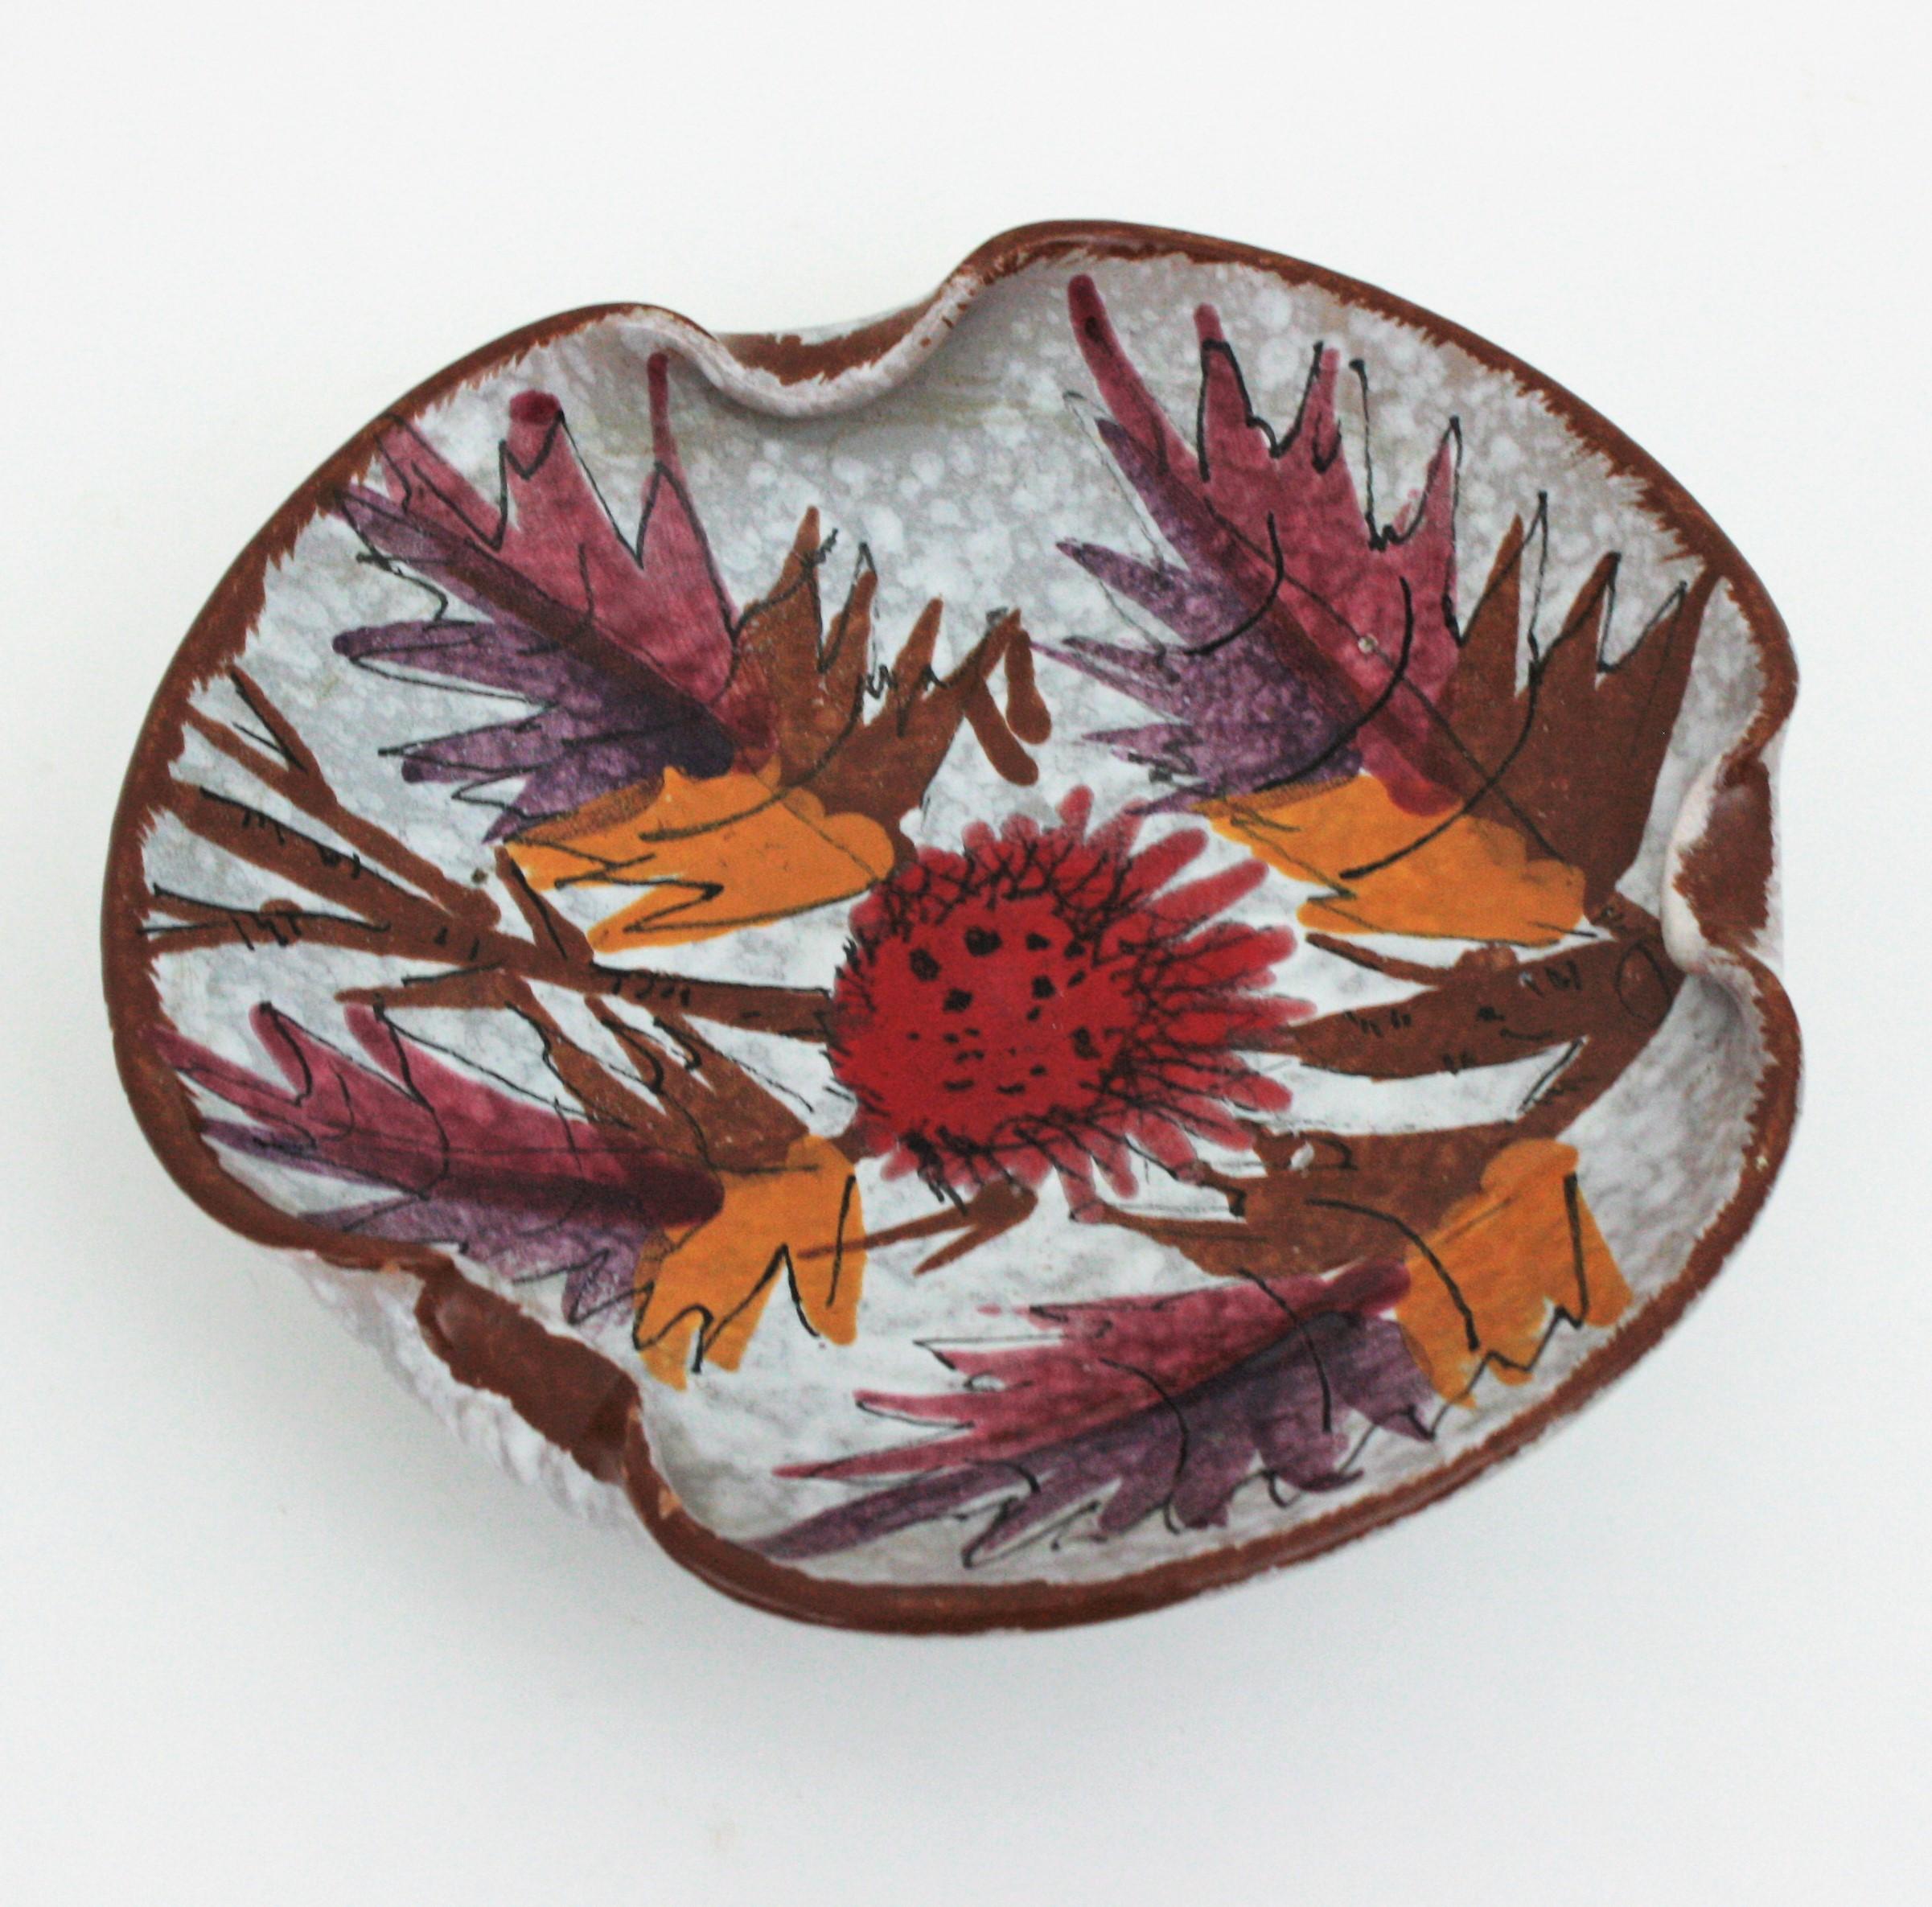 Midcentury Decorative Bowl in Glazed Terracota and Foliage Motif In Good Condition For Sale In Barcelona, ES